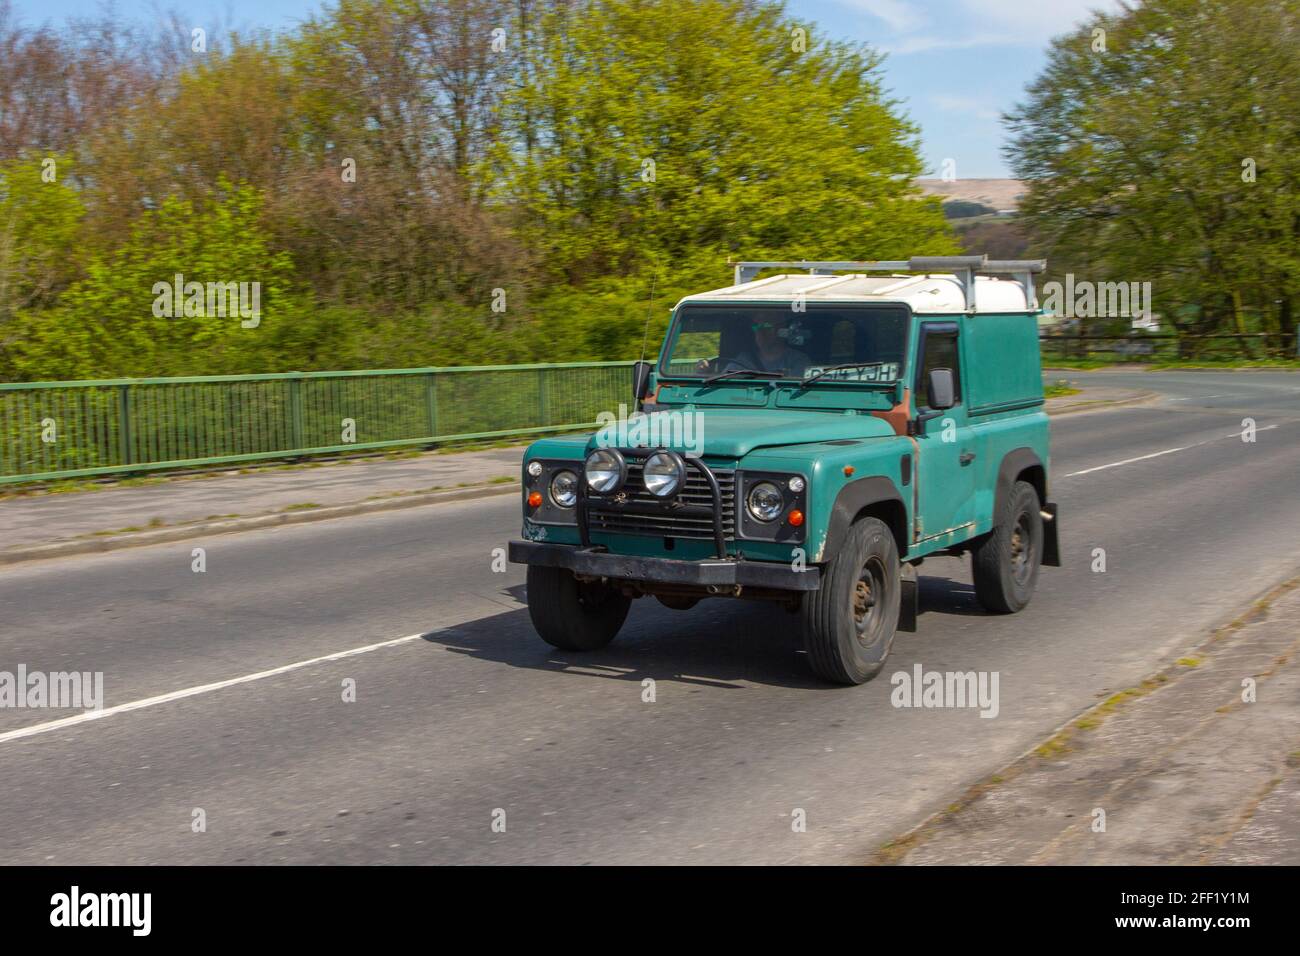 1987 80s green Land Rover 90 Reg Dt diesel; moving vehicles, cars, vehicle driving on UK roads, LCV motors, motoring on the M6 English motorway road network Stock Photo